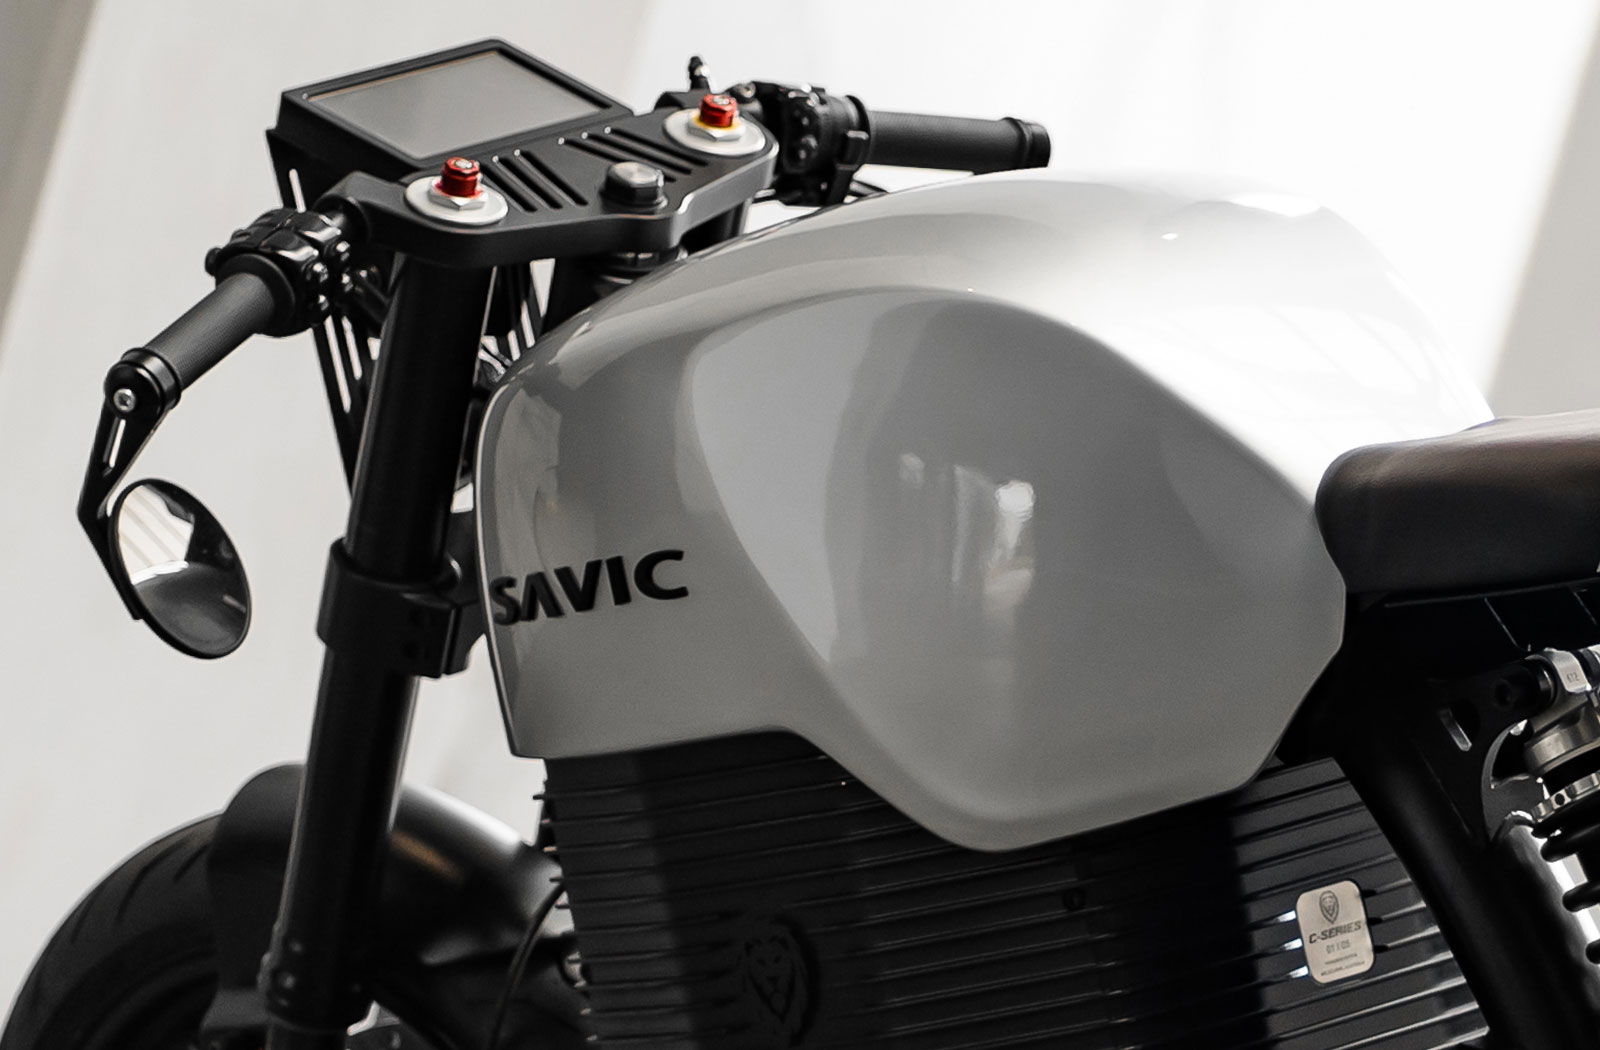 Savic Electric Motorcycles 2022 interview